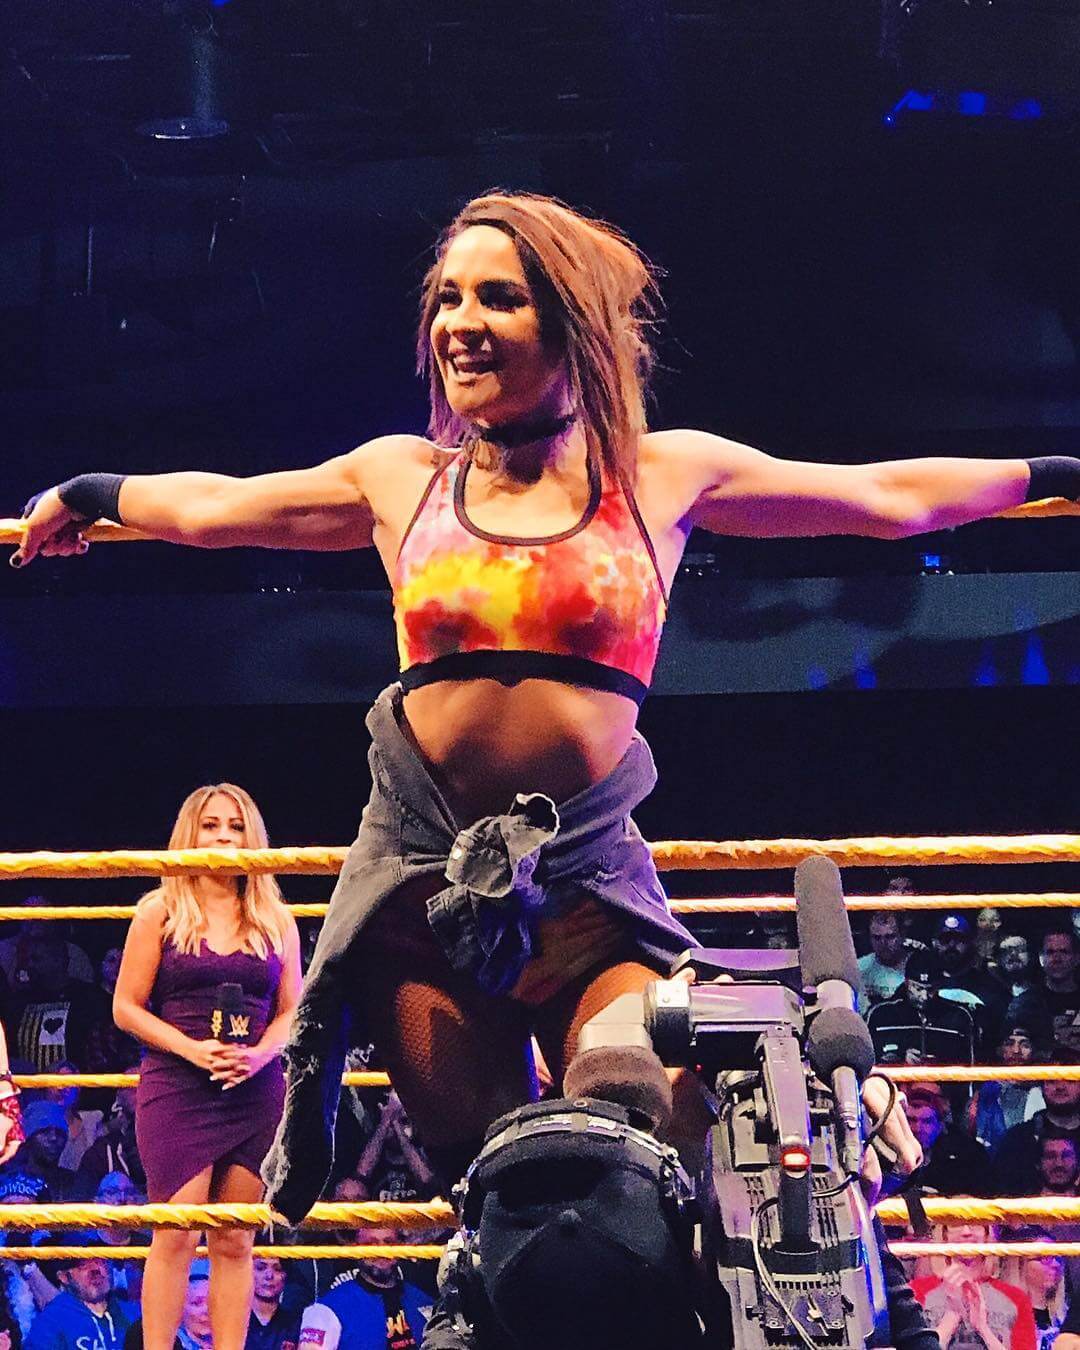 60+ Hot Pictures Of Dakota Kai Which Will Make You Want To Jump Into Bed With Her | Best Of Comic Books